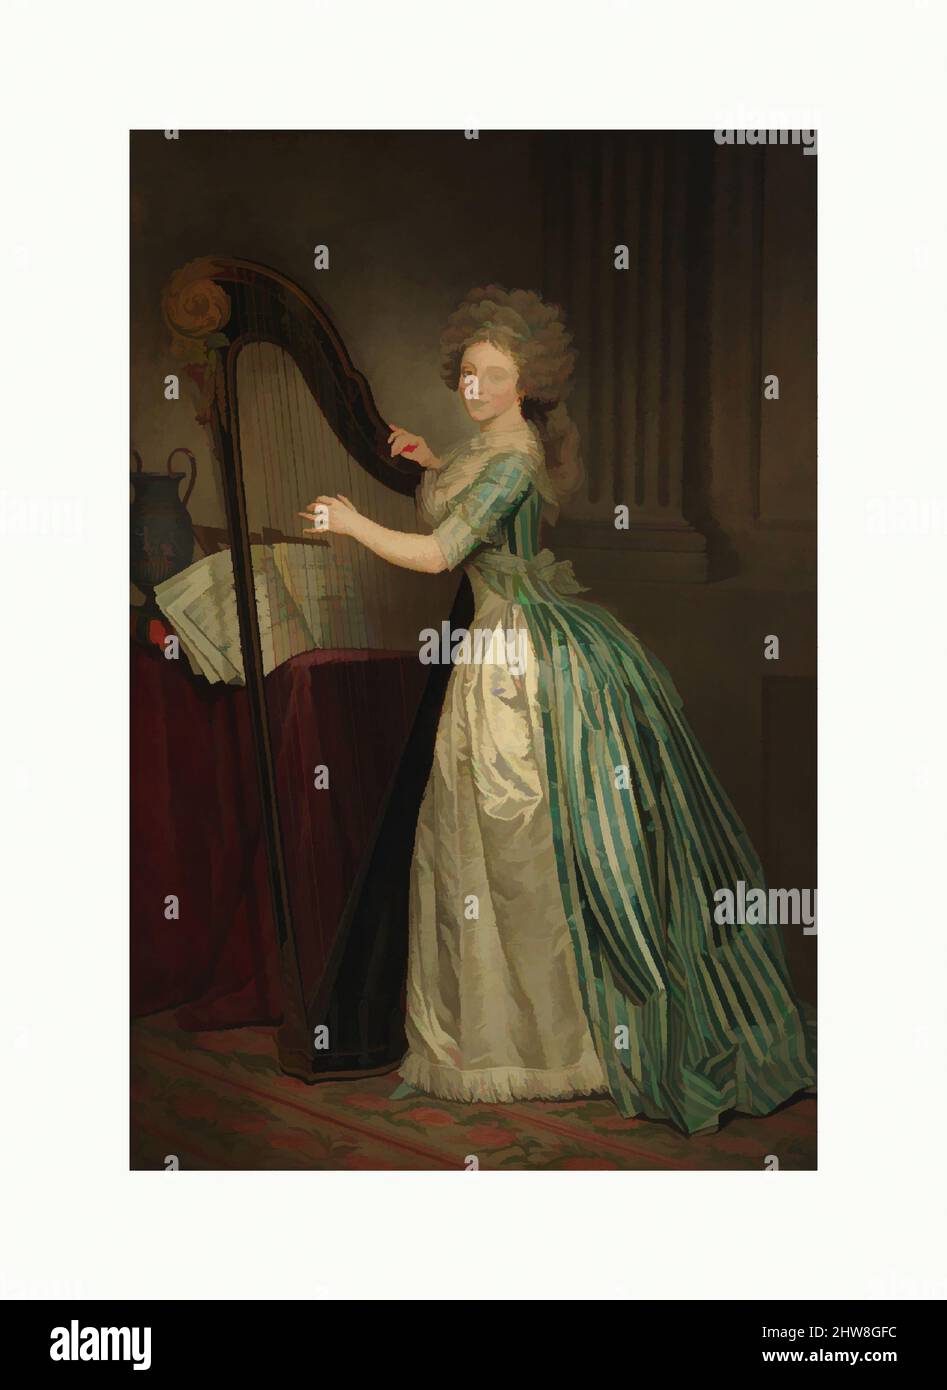 Art inspired by Self-Portrait with a Harp, 1791, Oil on canvas, 76 x 50 3/4 in. (193 x 128.9 cm), Paintings, Rose Adélaïde Ducreux (French, Paris 1761–1802 Santo Domingo), This work has been identified with a self-portrait that Mademoiselle Ducreux exhibited at the Paris Salon of 1791, Classic works modernized by Artotop with a splash of modernity. Shapes, color and value, eye-catching visual impact on art. Emotions through freedom of artworks in a contemporary way. A timeless message pursuing a wildly creative new direction. Artists turning to the digital medium and creating the Artotop NFT Stock Photo